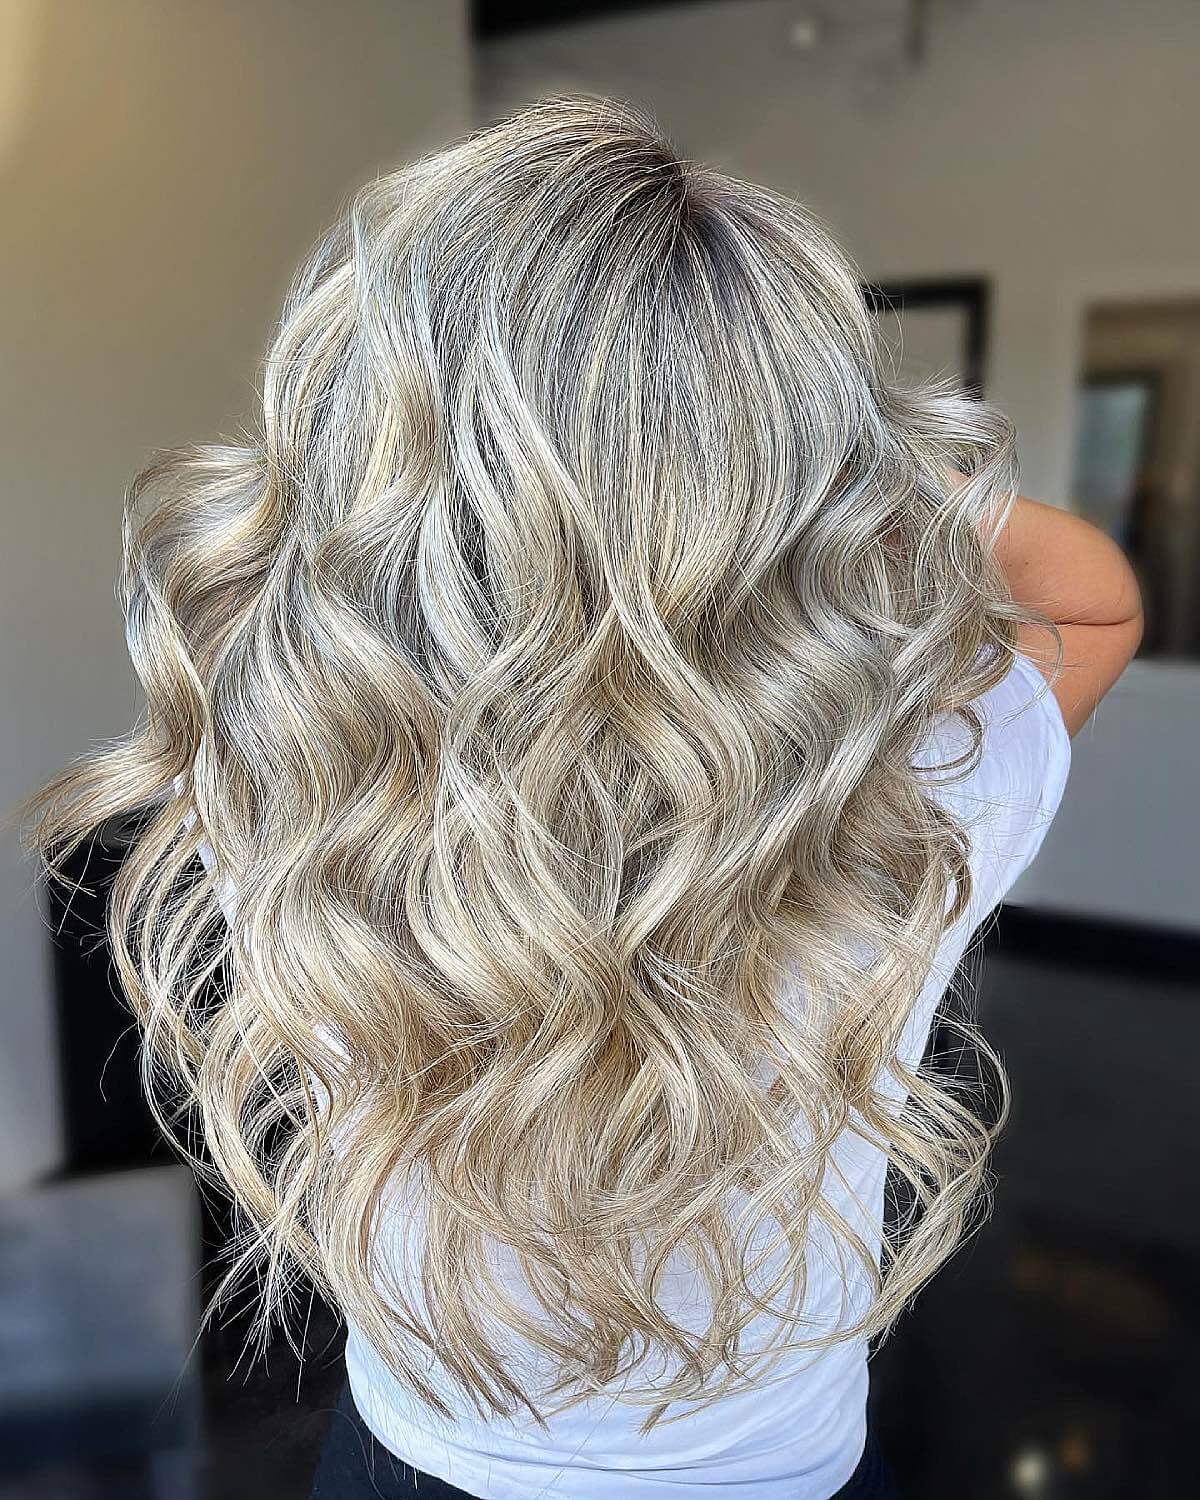 wavy long blonde hairstyle